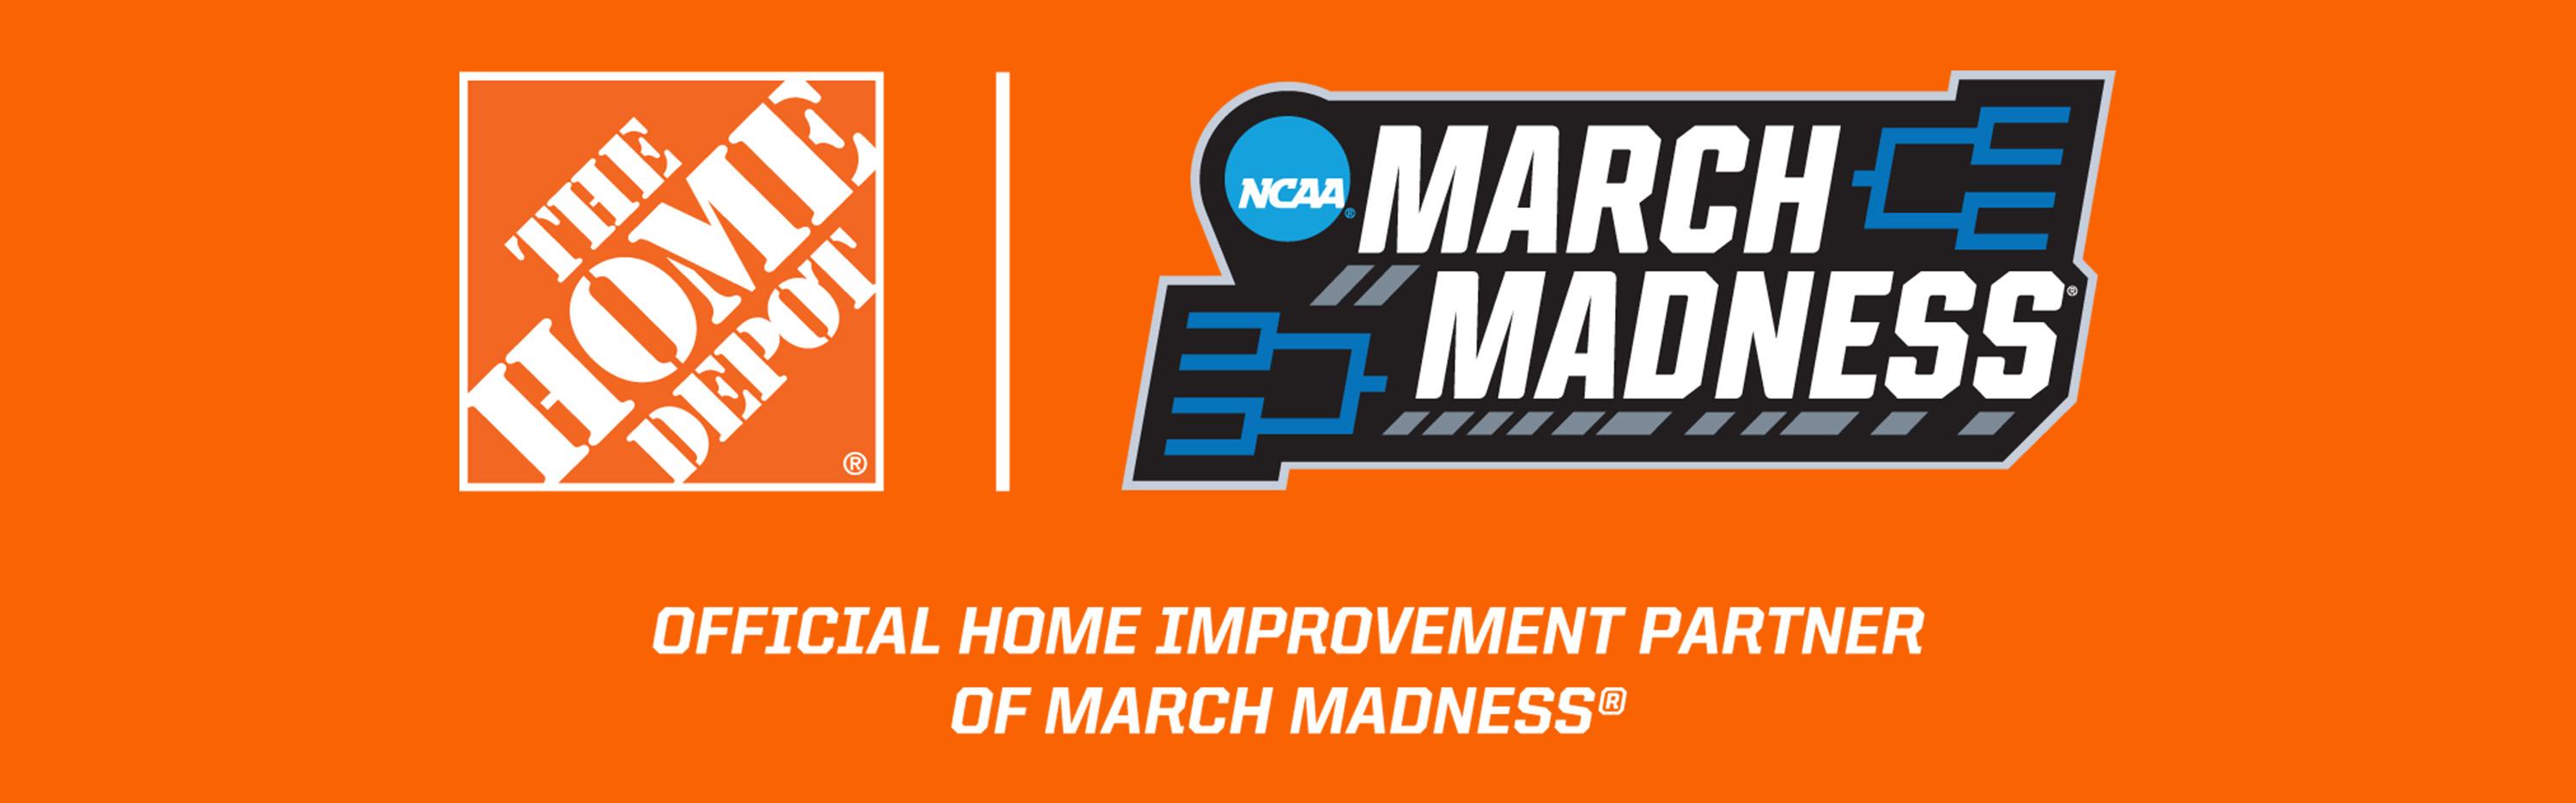 Home Depot and March Madness logo on orange background